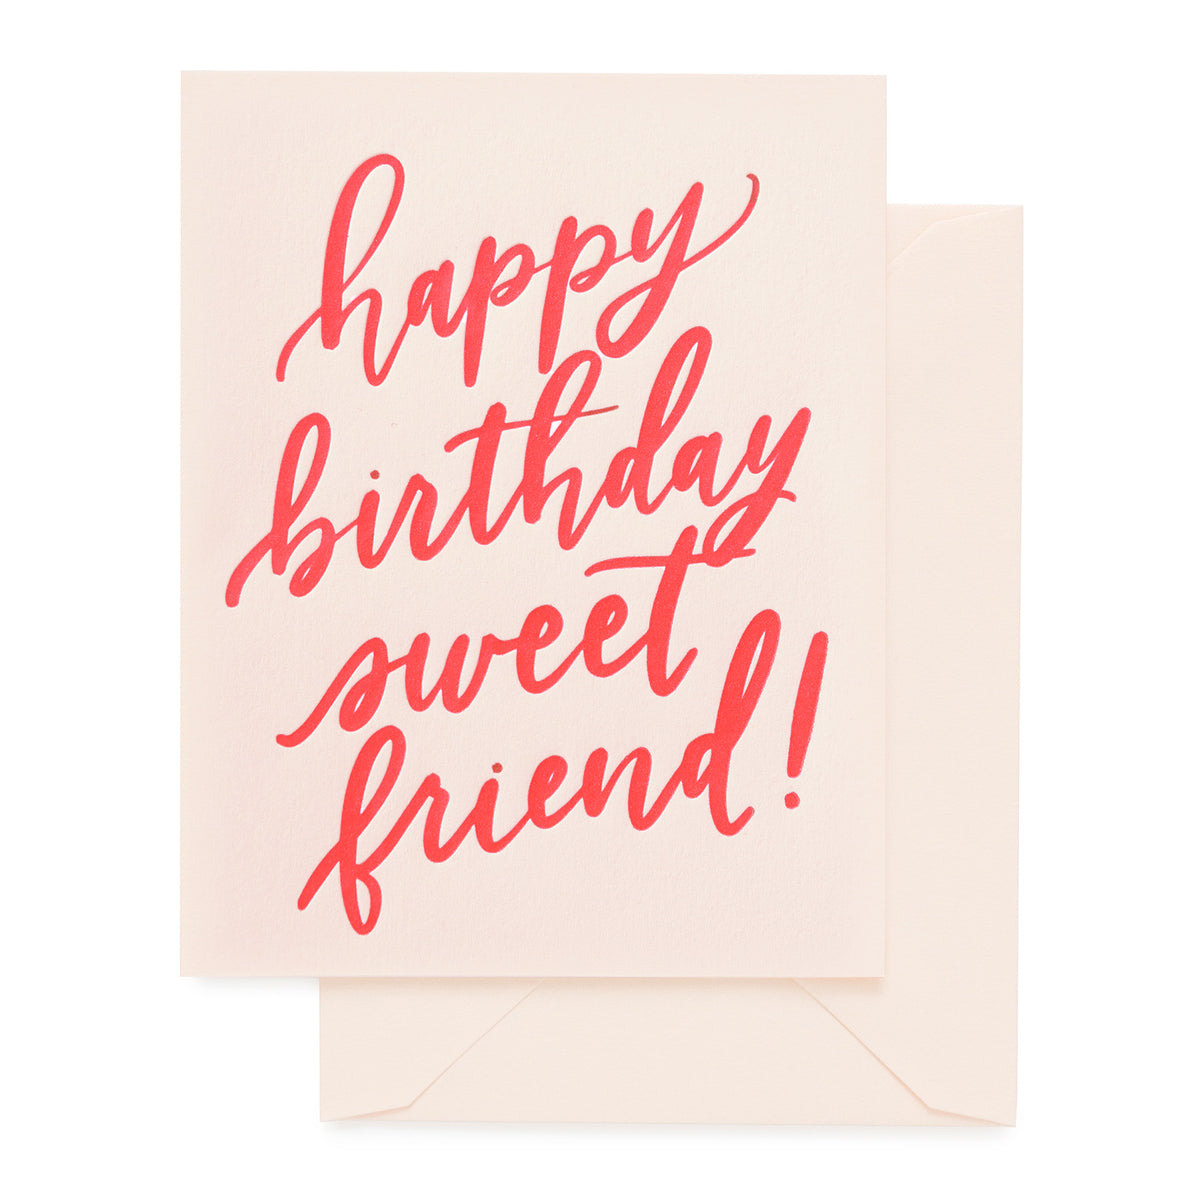 pale pink card with neon text and pale pink envelope